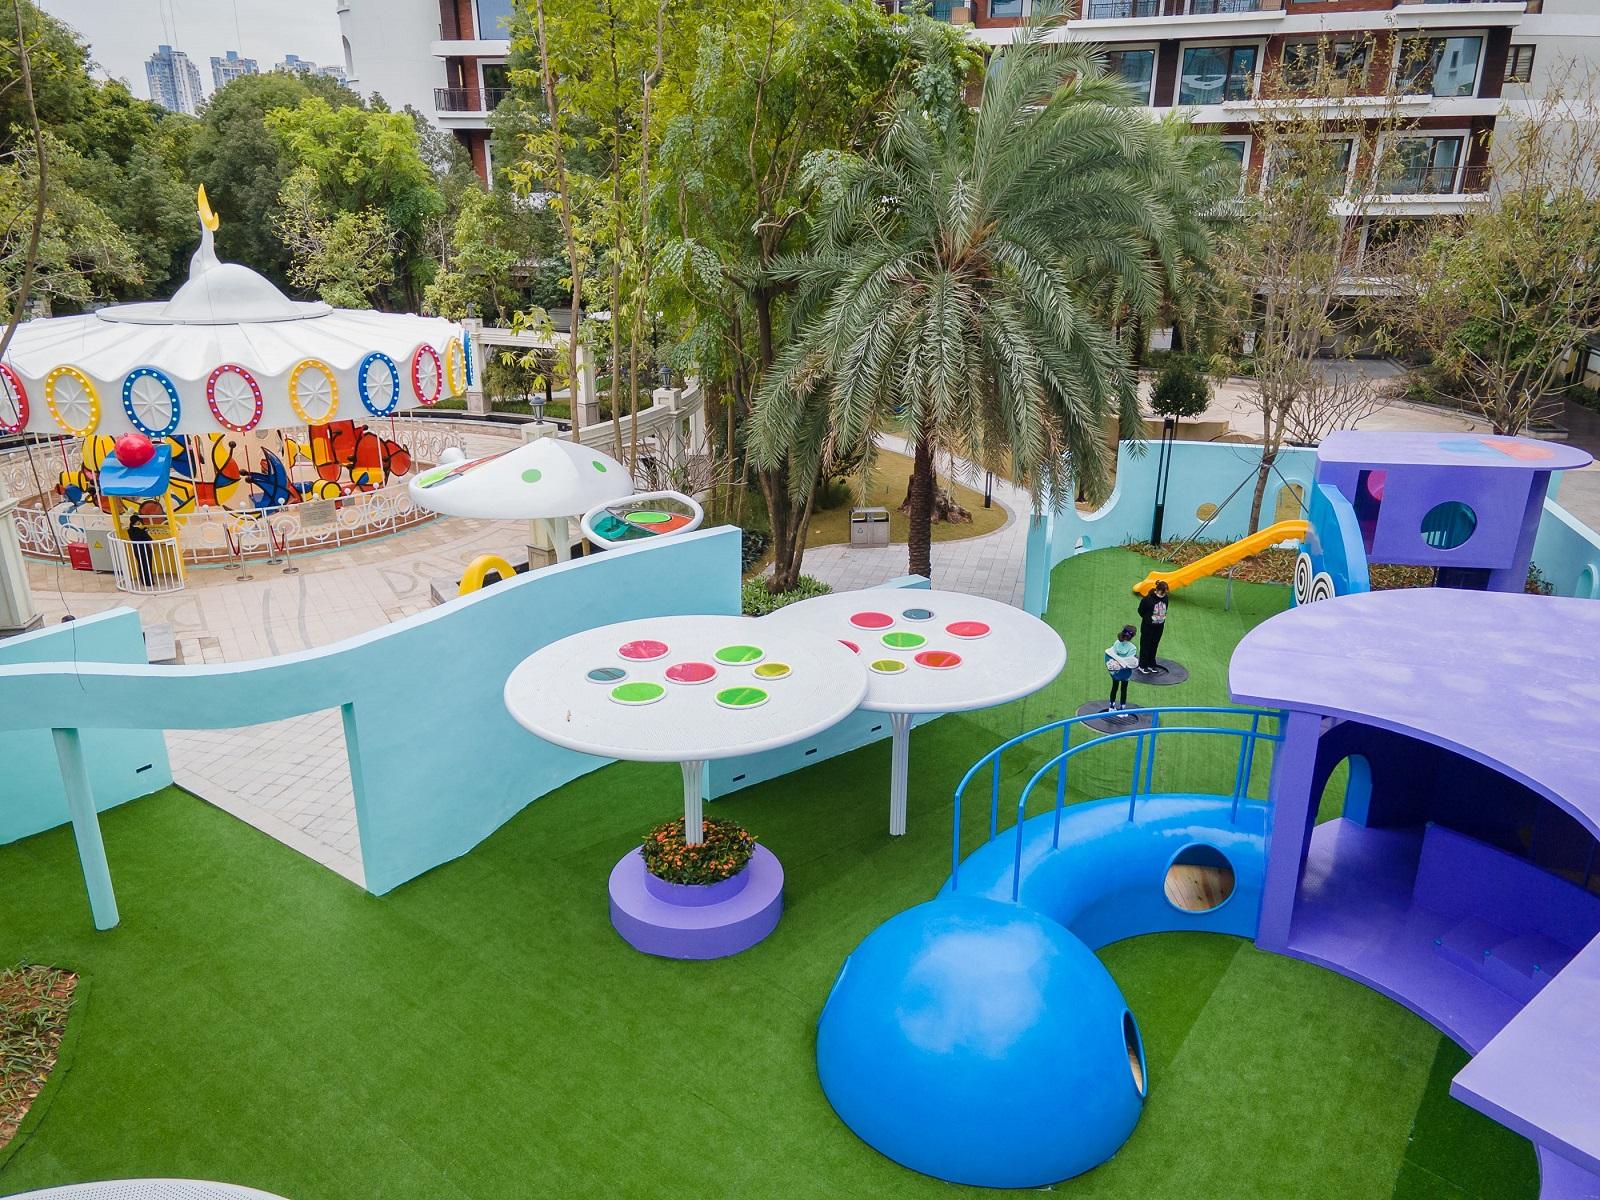 The 10 Best Hotel Kids Clubs in China